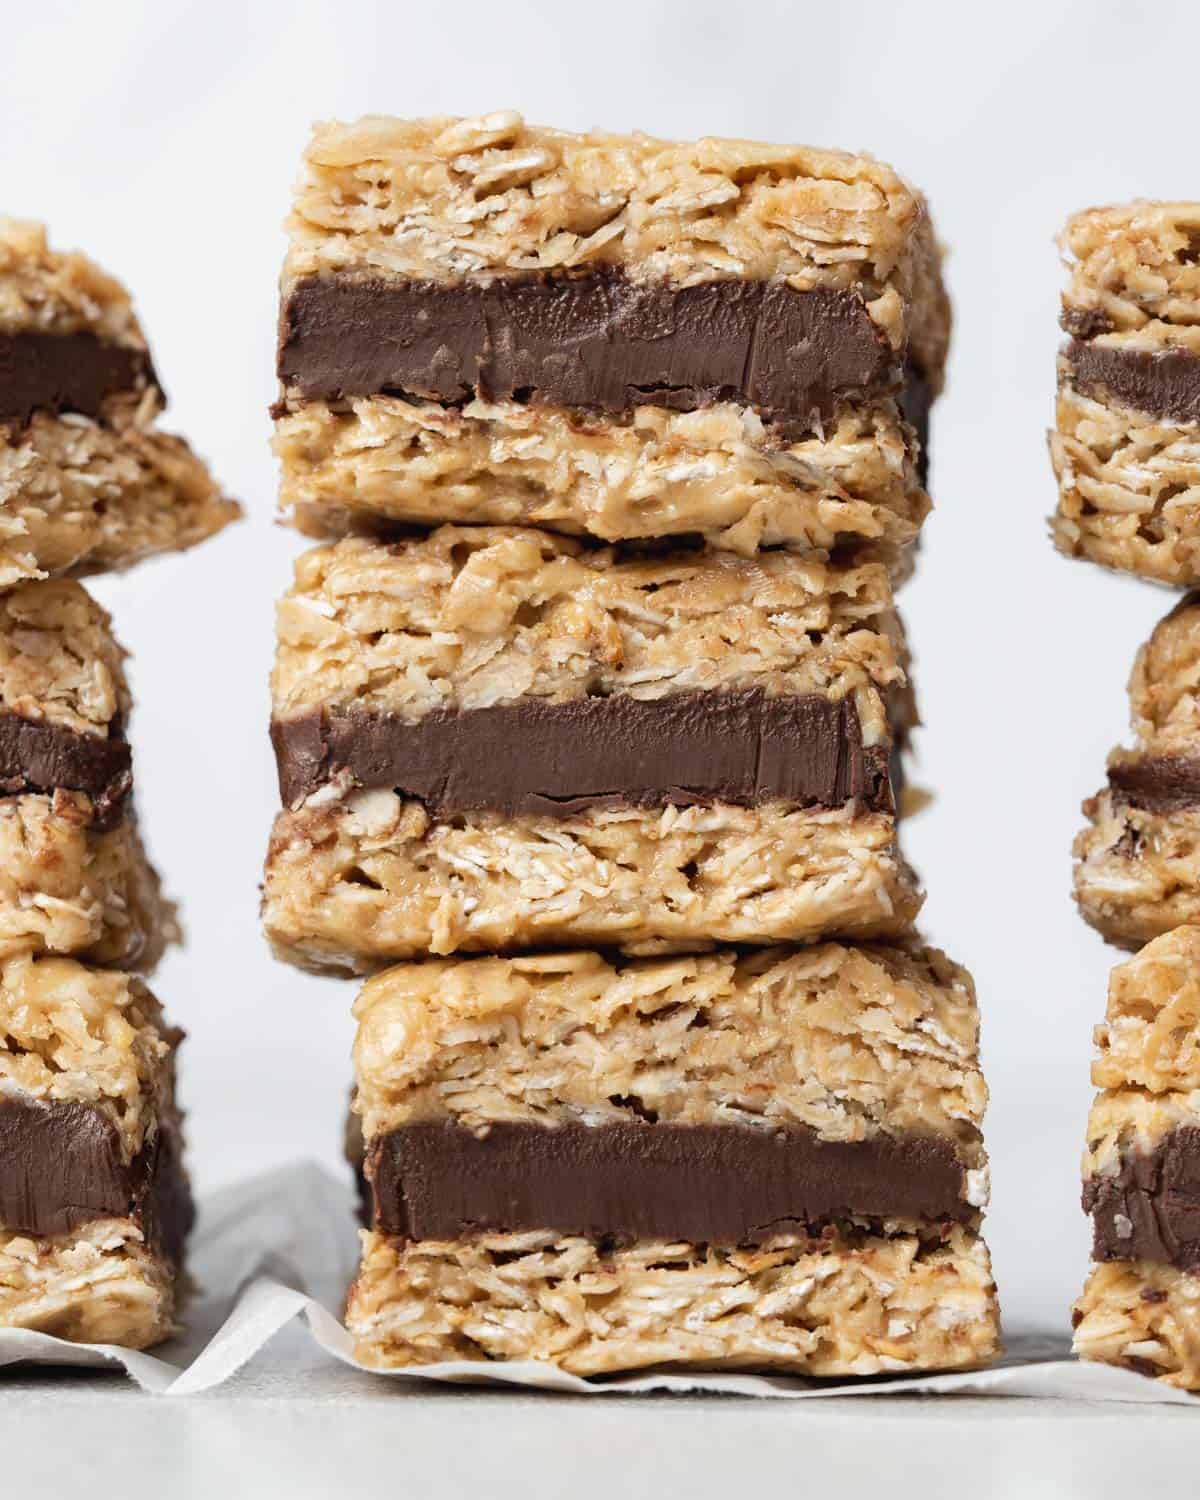 3 chocolate-filled oat bars stacked over each other.